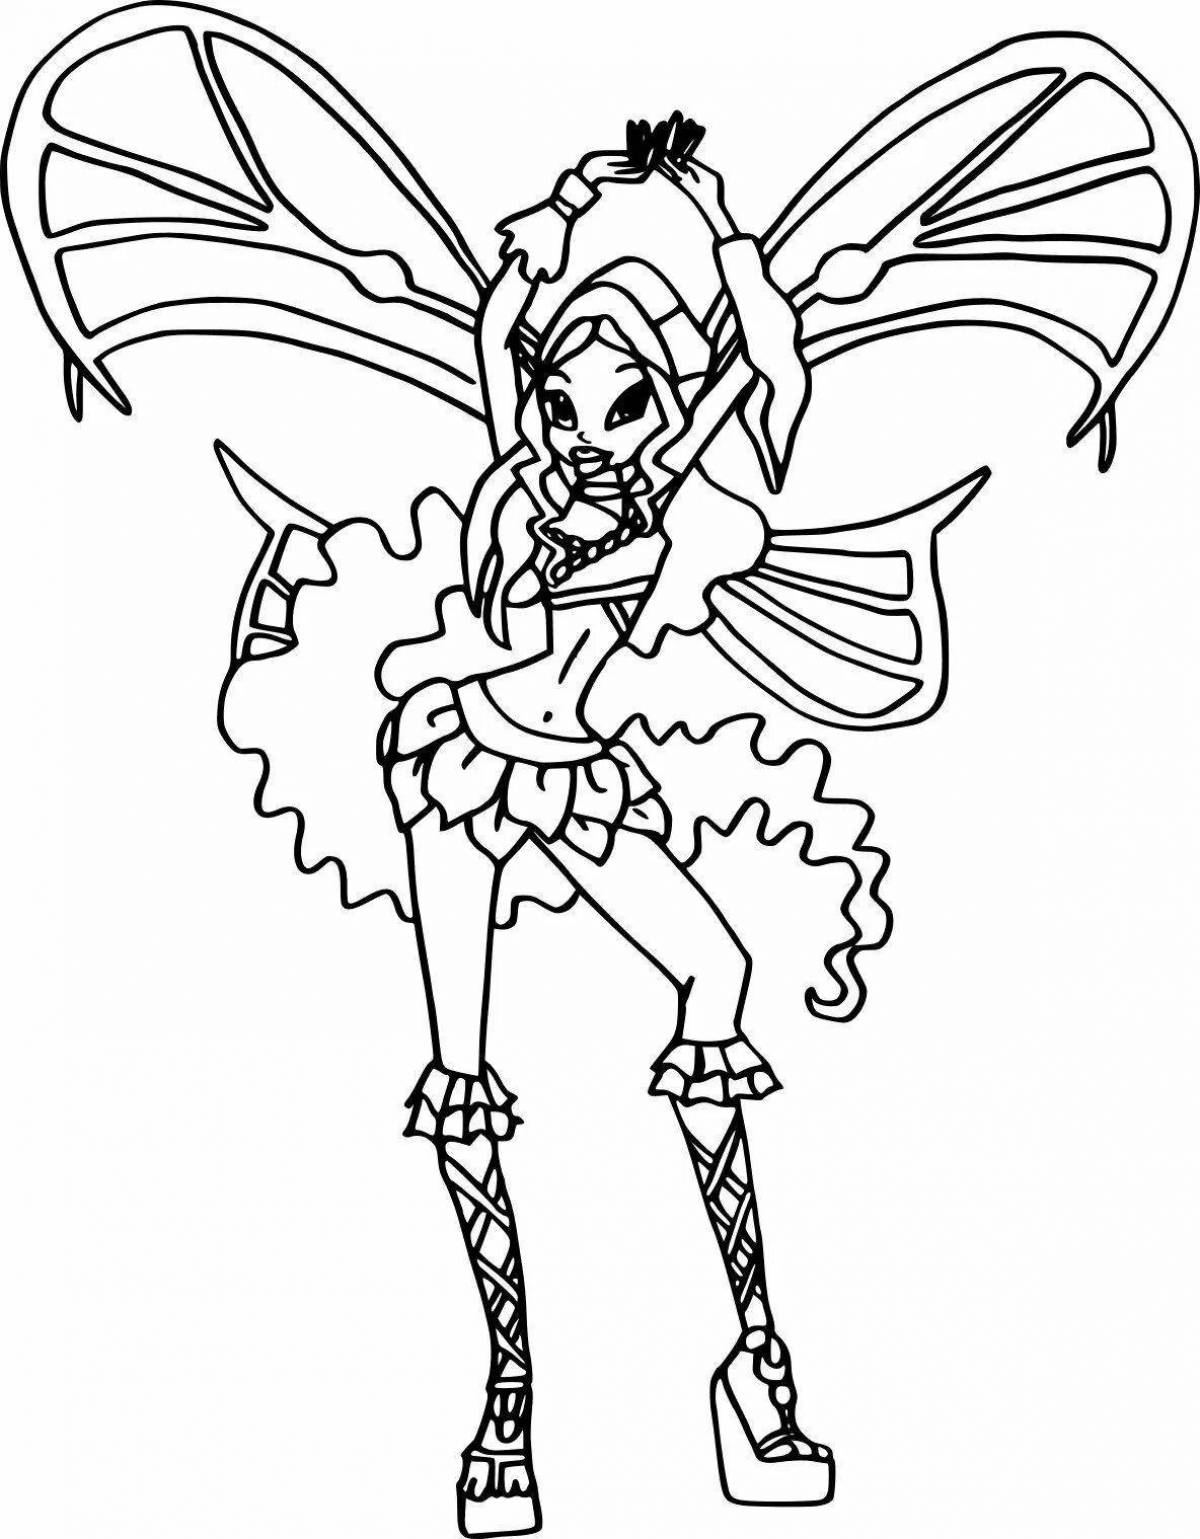 Winx layla believix adorable coloring page